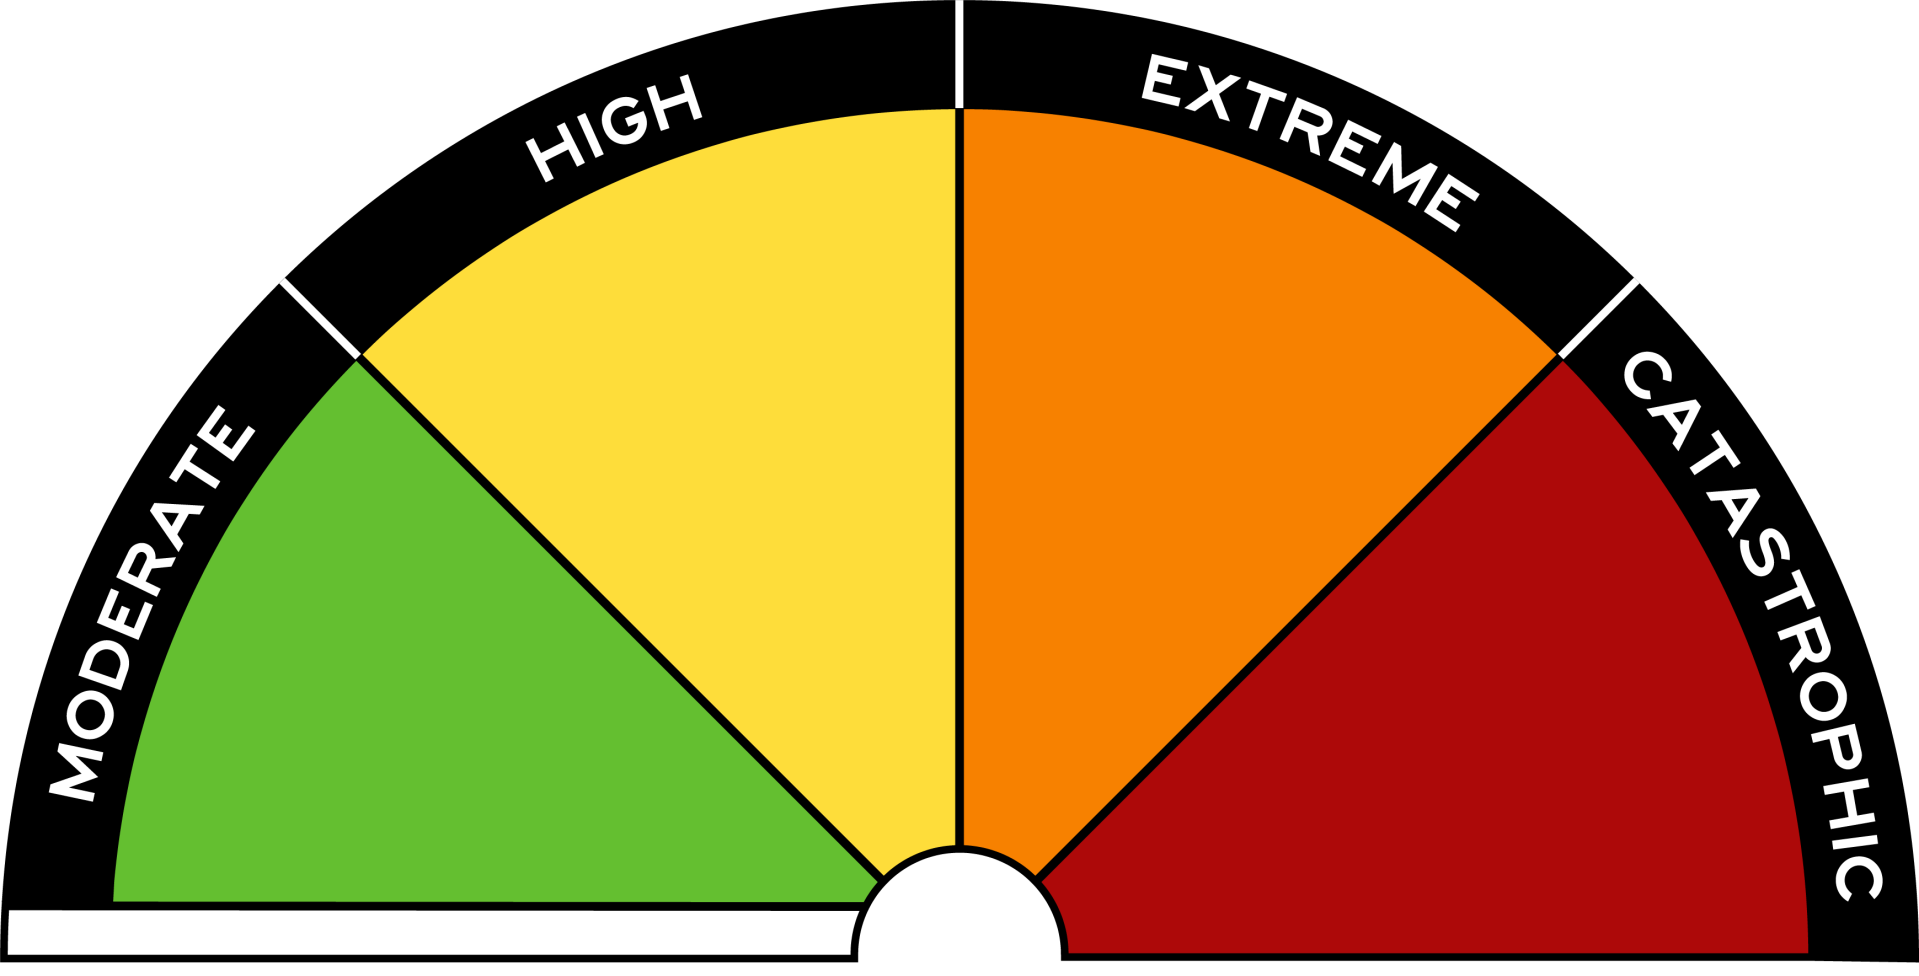 Fire Danger Ratings, Alerts and Warnings Image